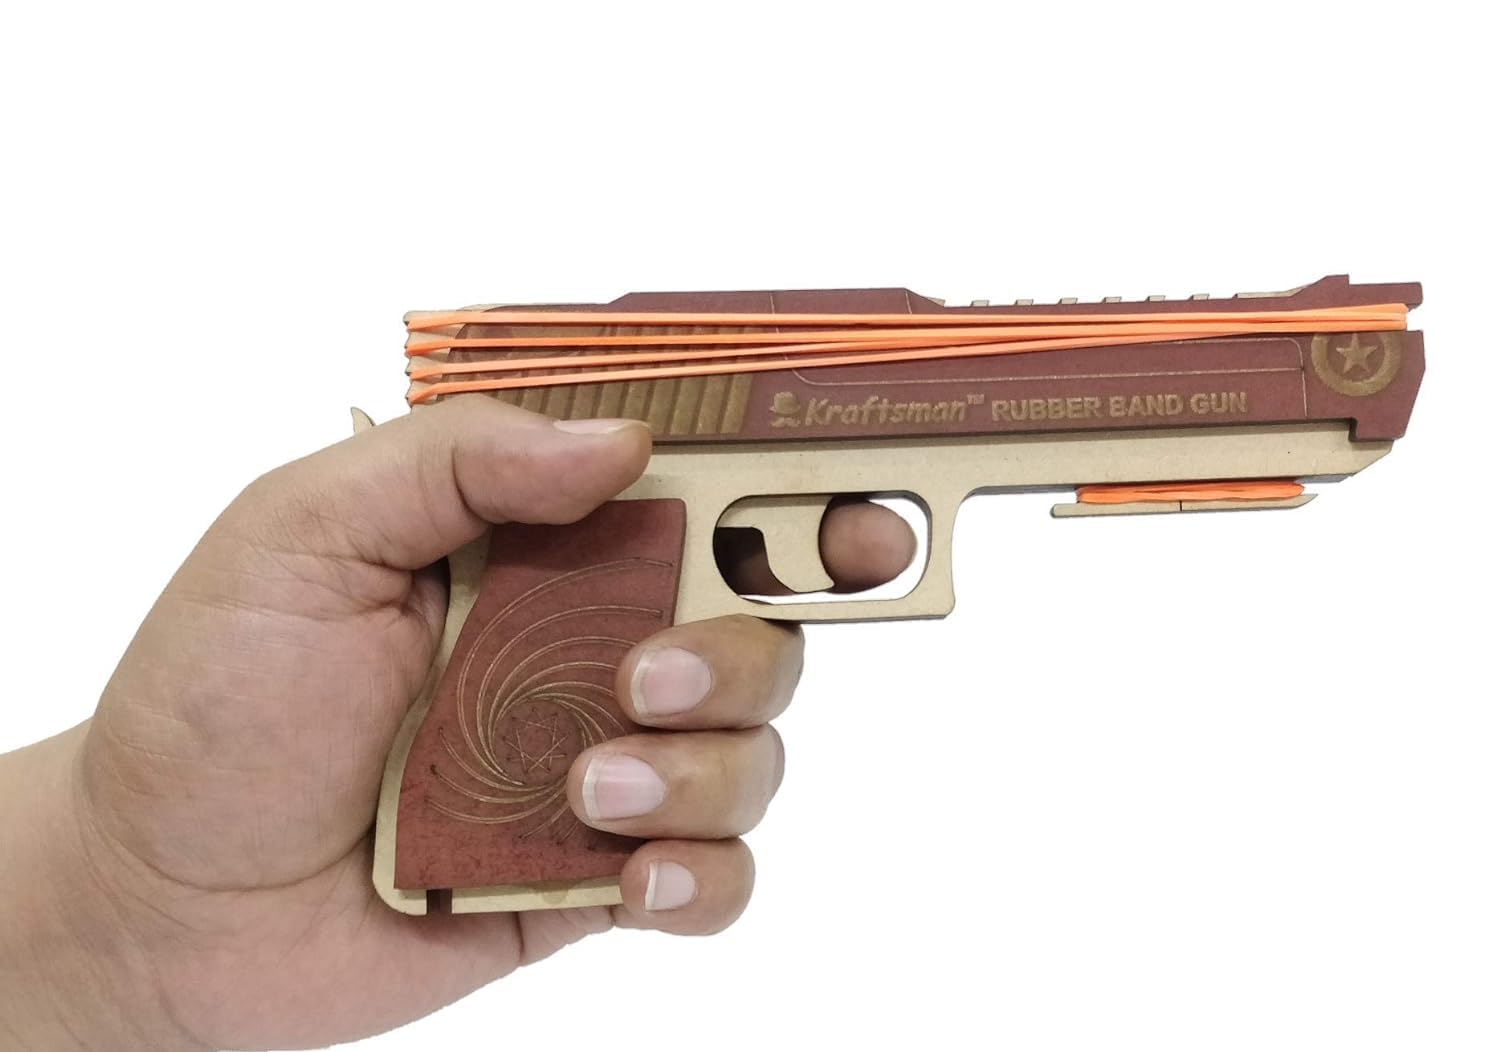 Braintastic Wooden Semi-Automatic Rubber Band Shooting Gun Toys with 5 Rapid Fire Shots for Kids (Brown Beige)